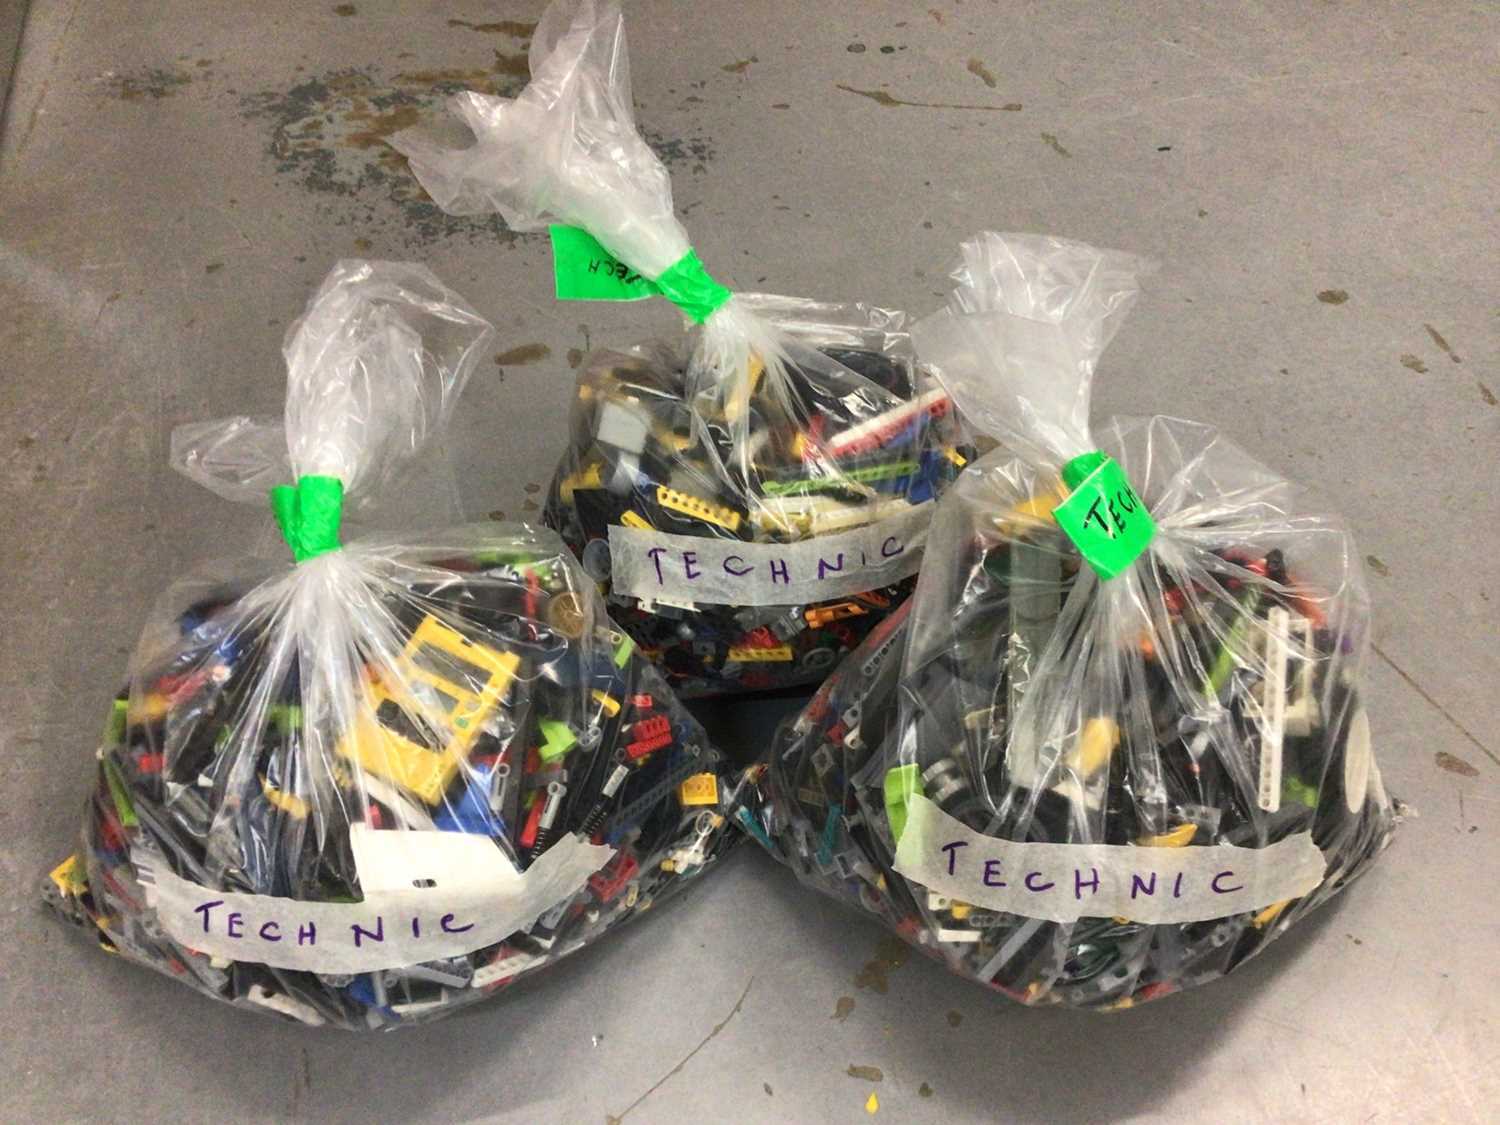 Lot 1773 - Three bags of assorted mixed Lego Technic bricks and accessories, weighing approx 15 Kg in total